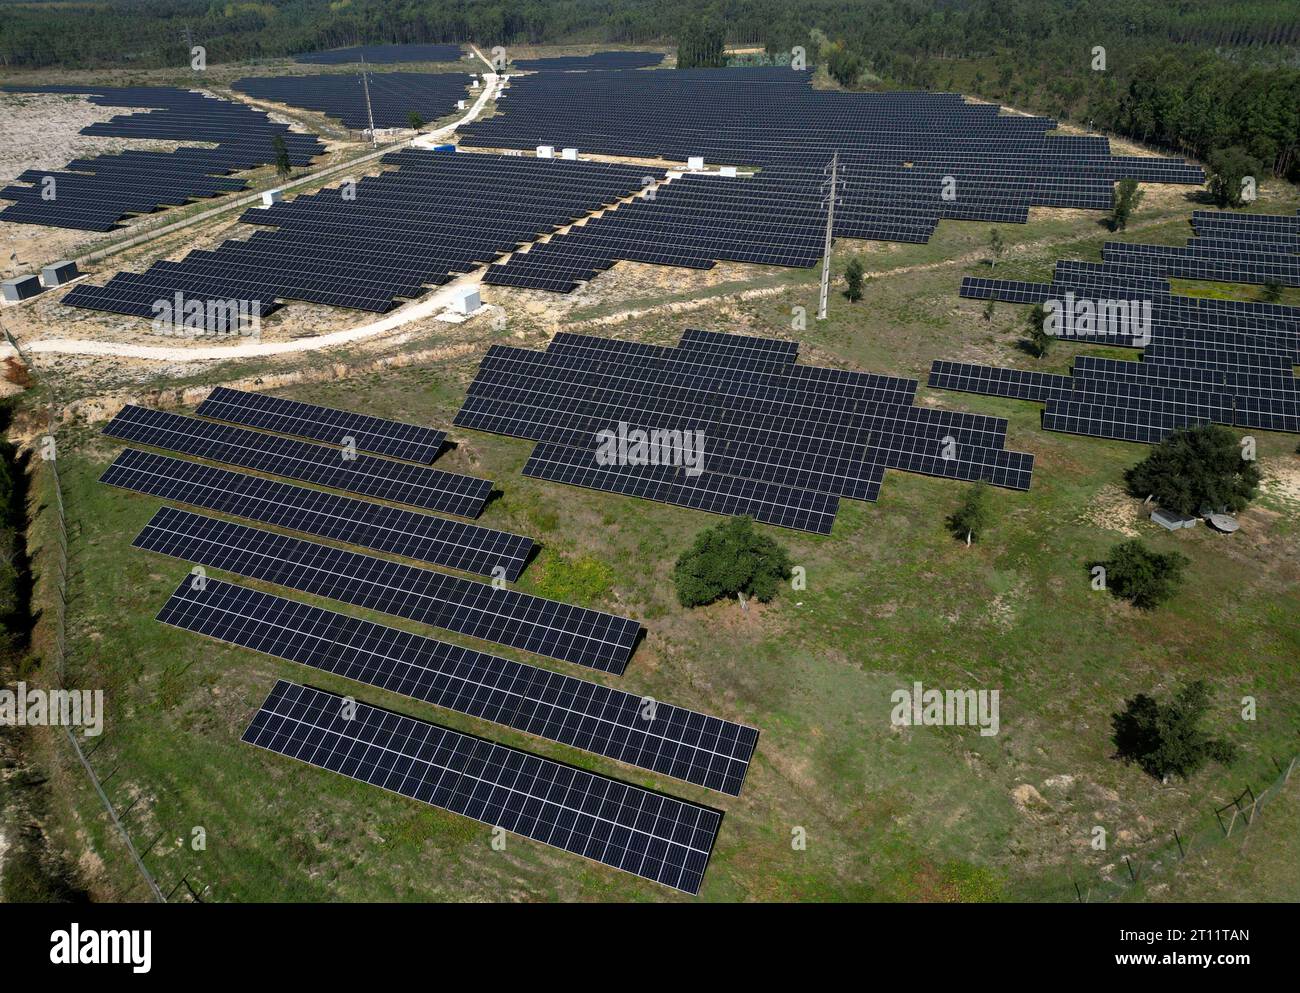 Solar panels on a photovoltaic power station Stock Photo